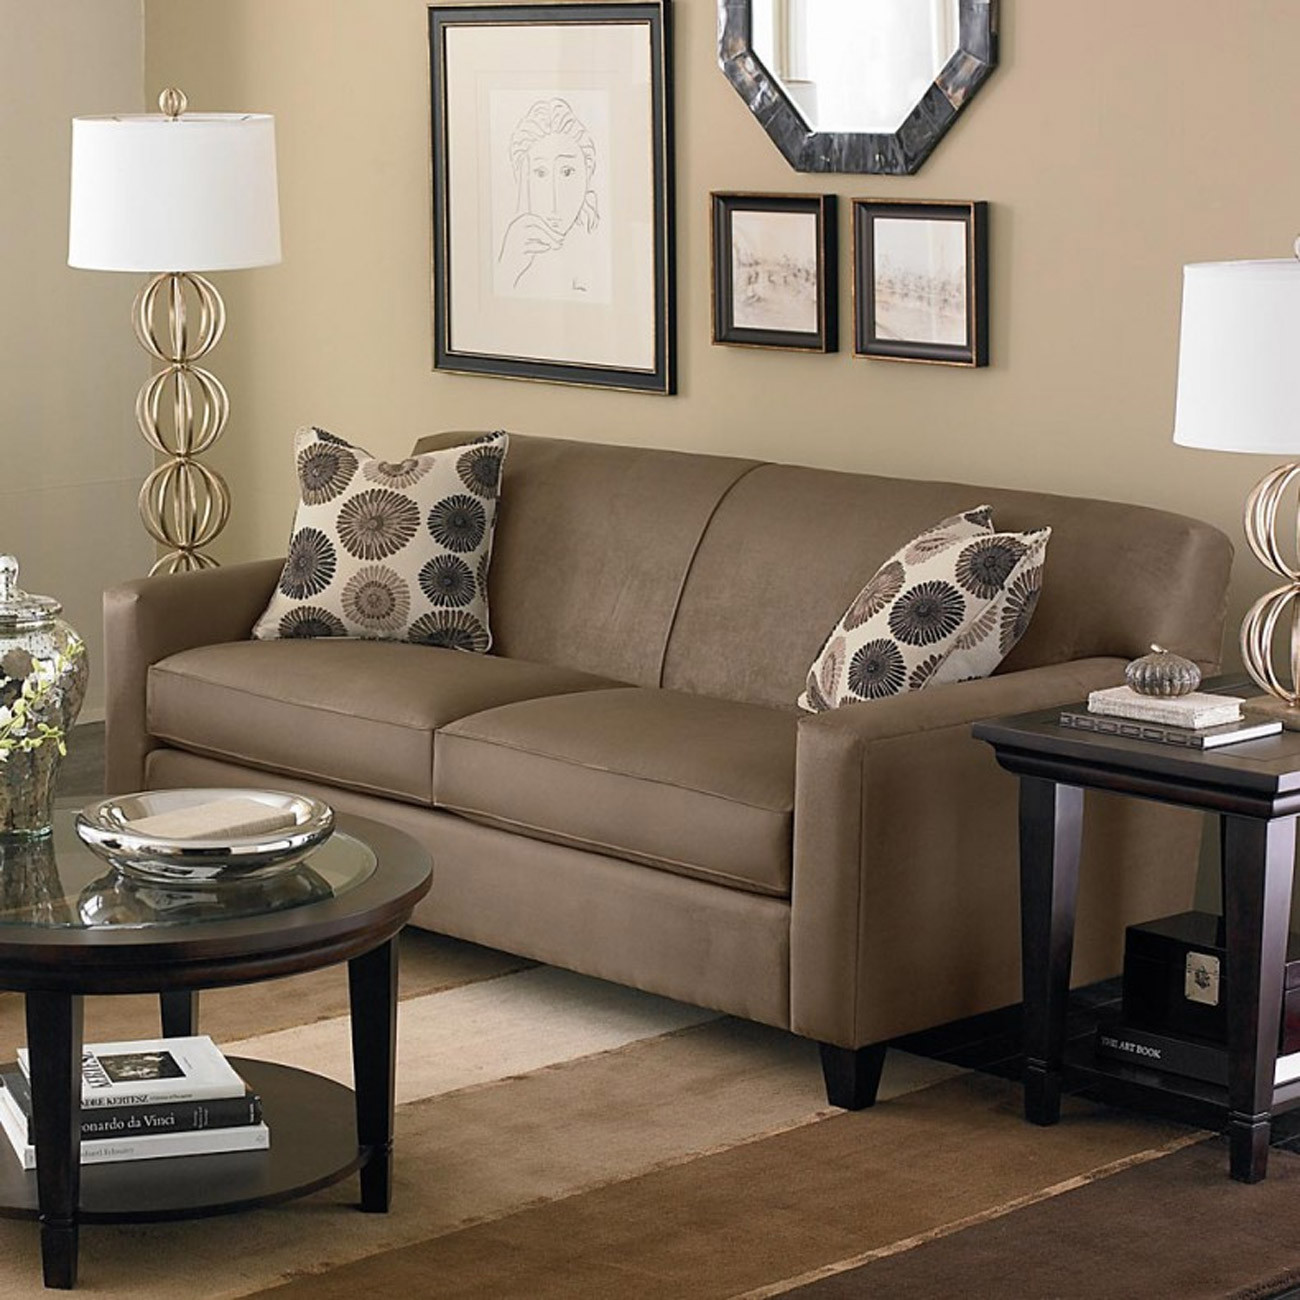 Brown Sofa Living Room Ideas
 Find Suitable Living Room Furniture With Your Style